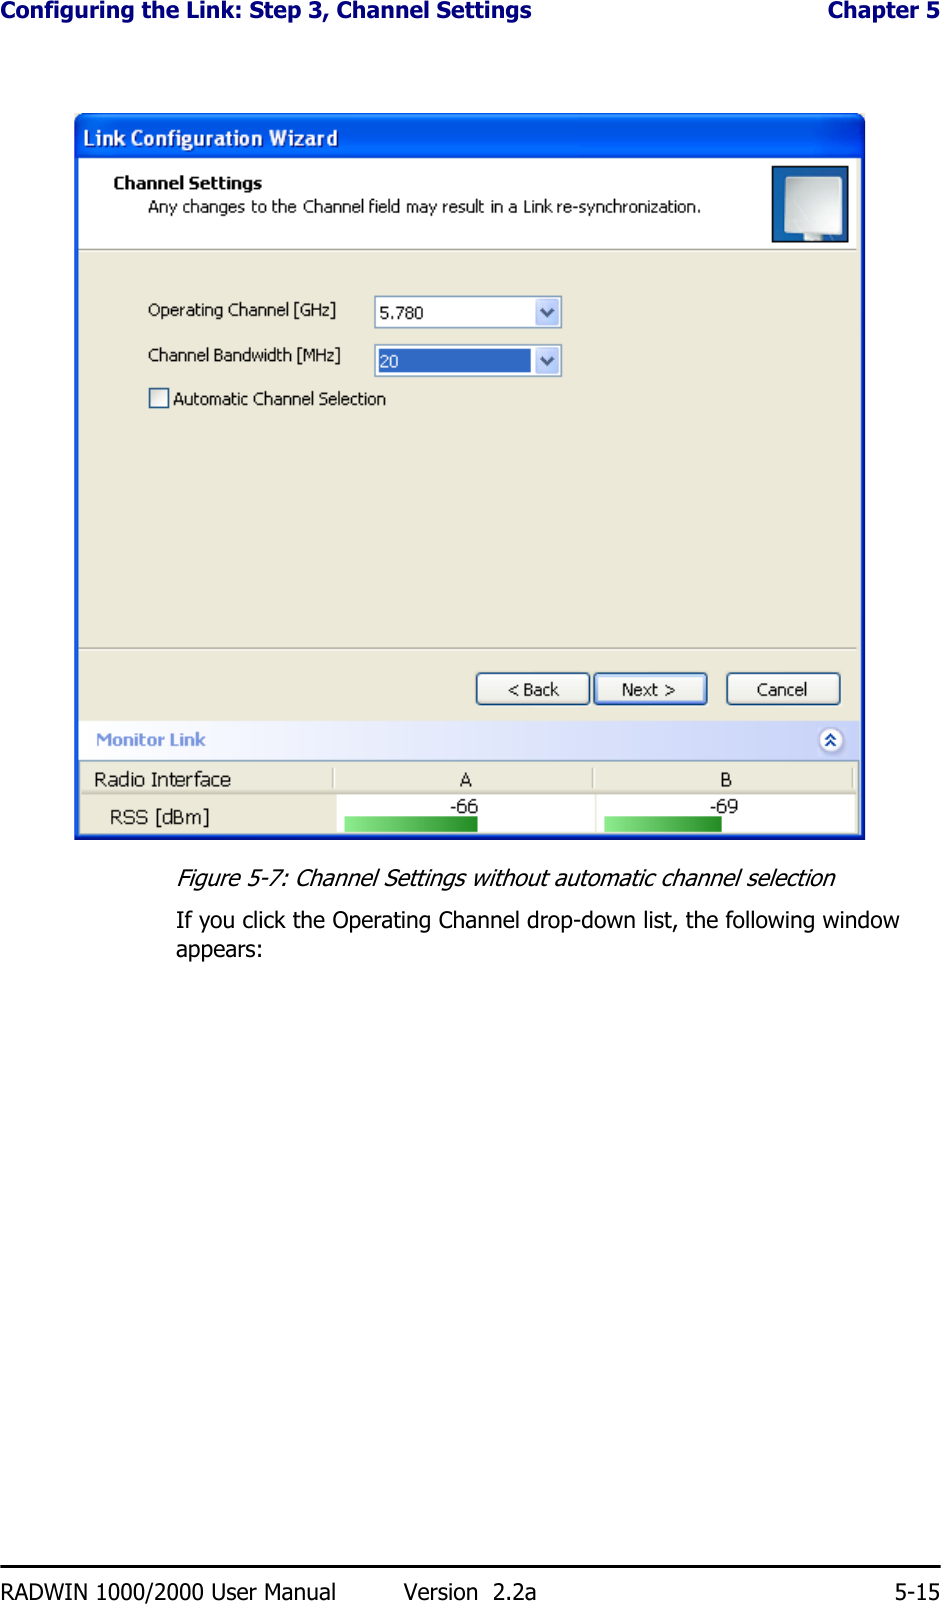 Configuring the Link: Step 3, Channel Settings  Chapter 5RADWIN 1000/2000 User Manual Version  2.2a 5-15Figure 5-7: Channel Settings without automatic channel selectionIf you click the Operating Channel drop-down list, the following window appears: